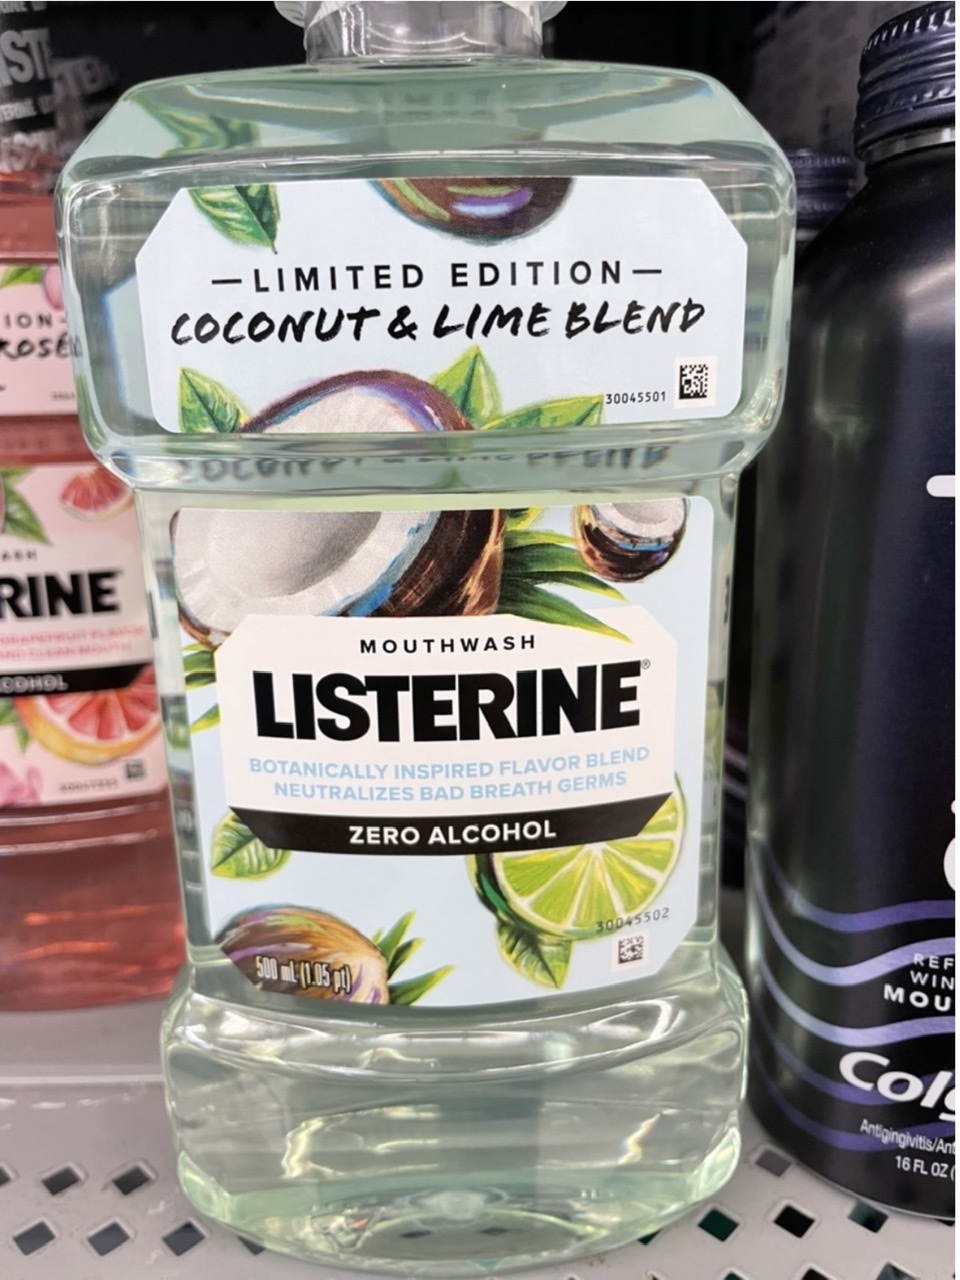 Put the lime in the Listerine, ahem, coconut!  Photo taken by and the property of FourWalls.